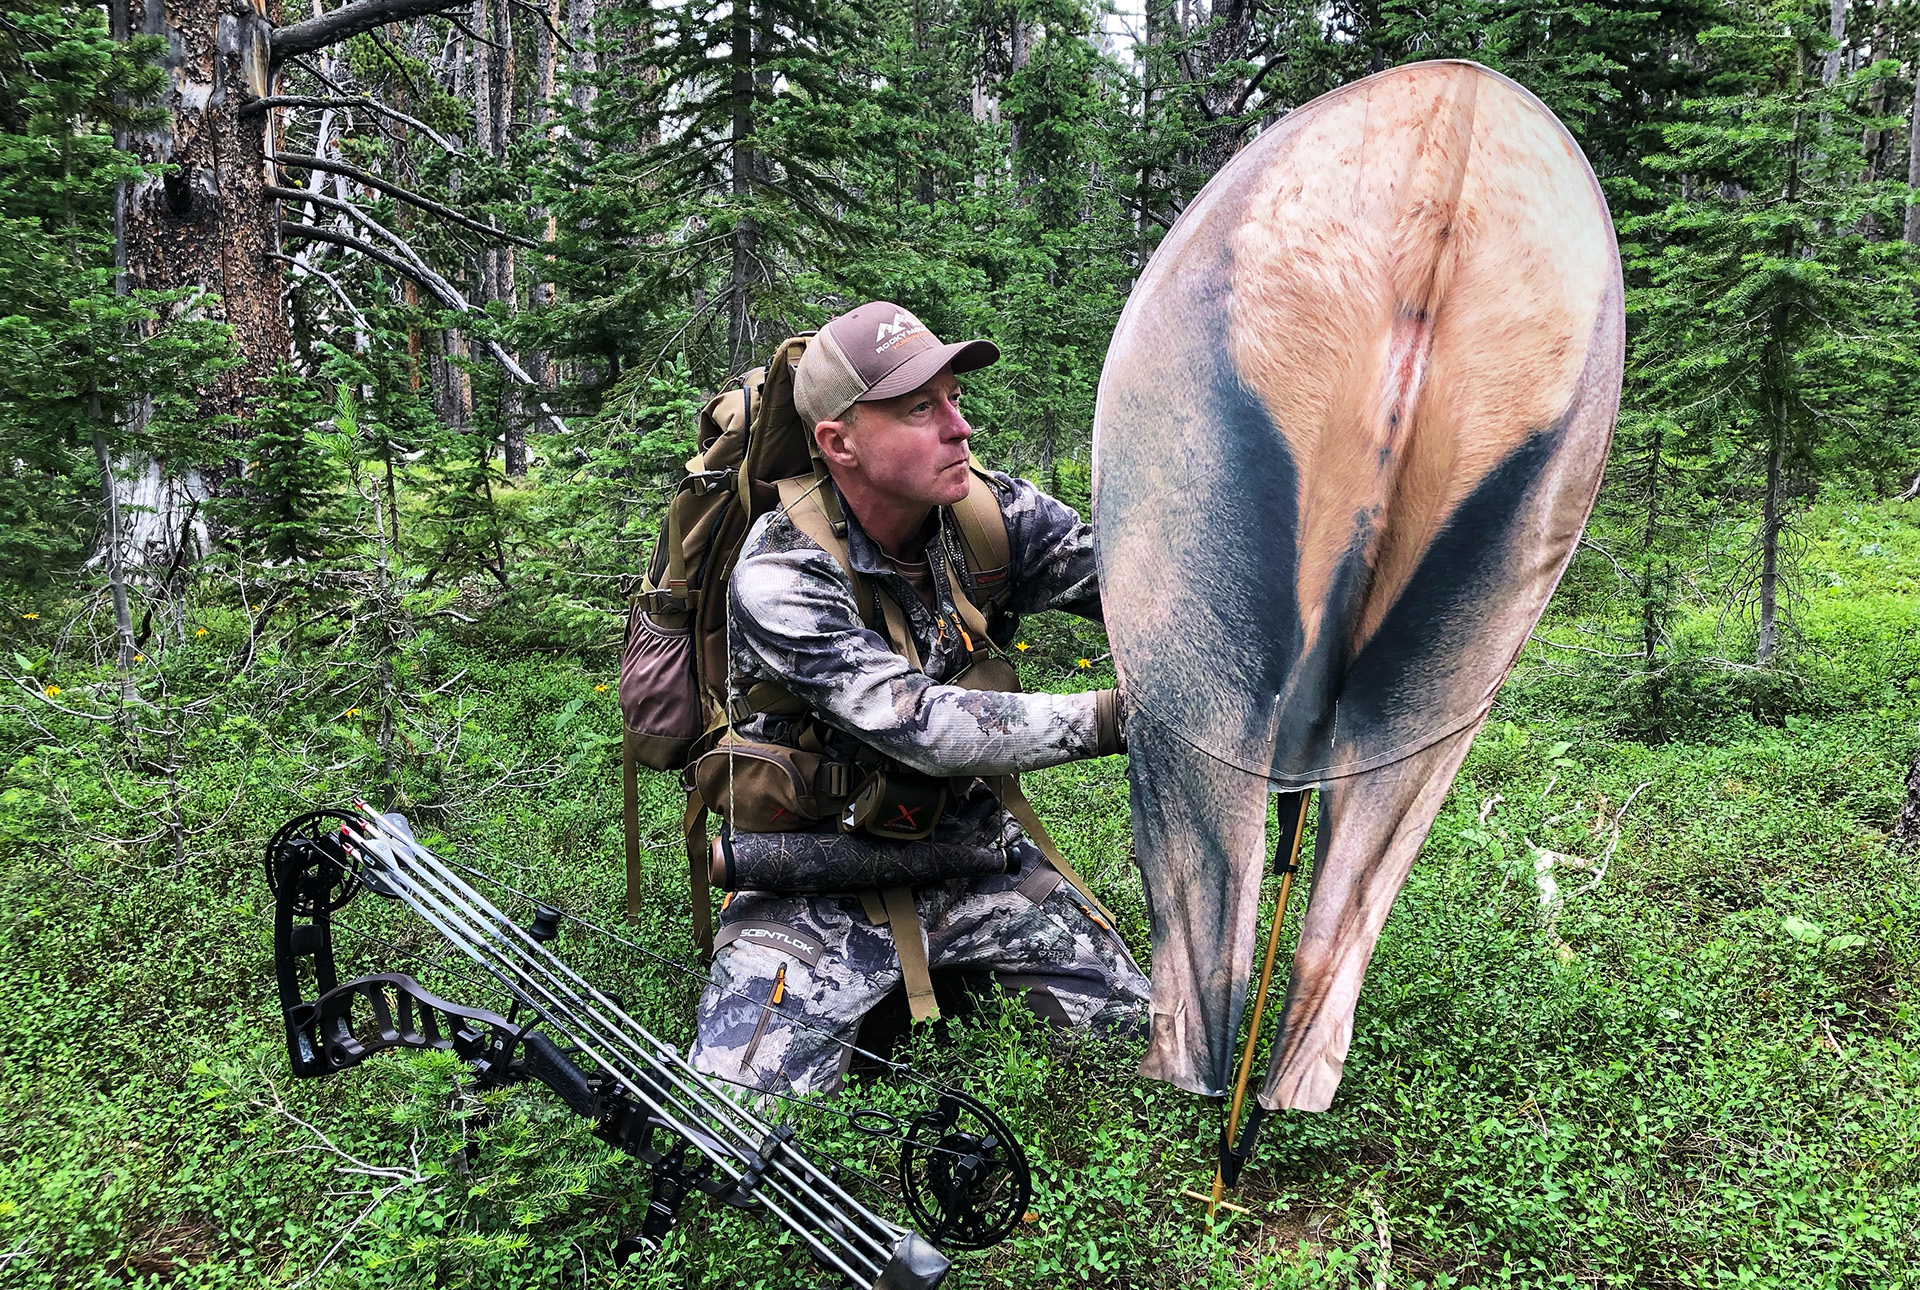 Few hunting strategies and tactics work perfectly alone.  A better approach is to use as many tools as are available in your hunting toolbox.